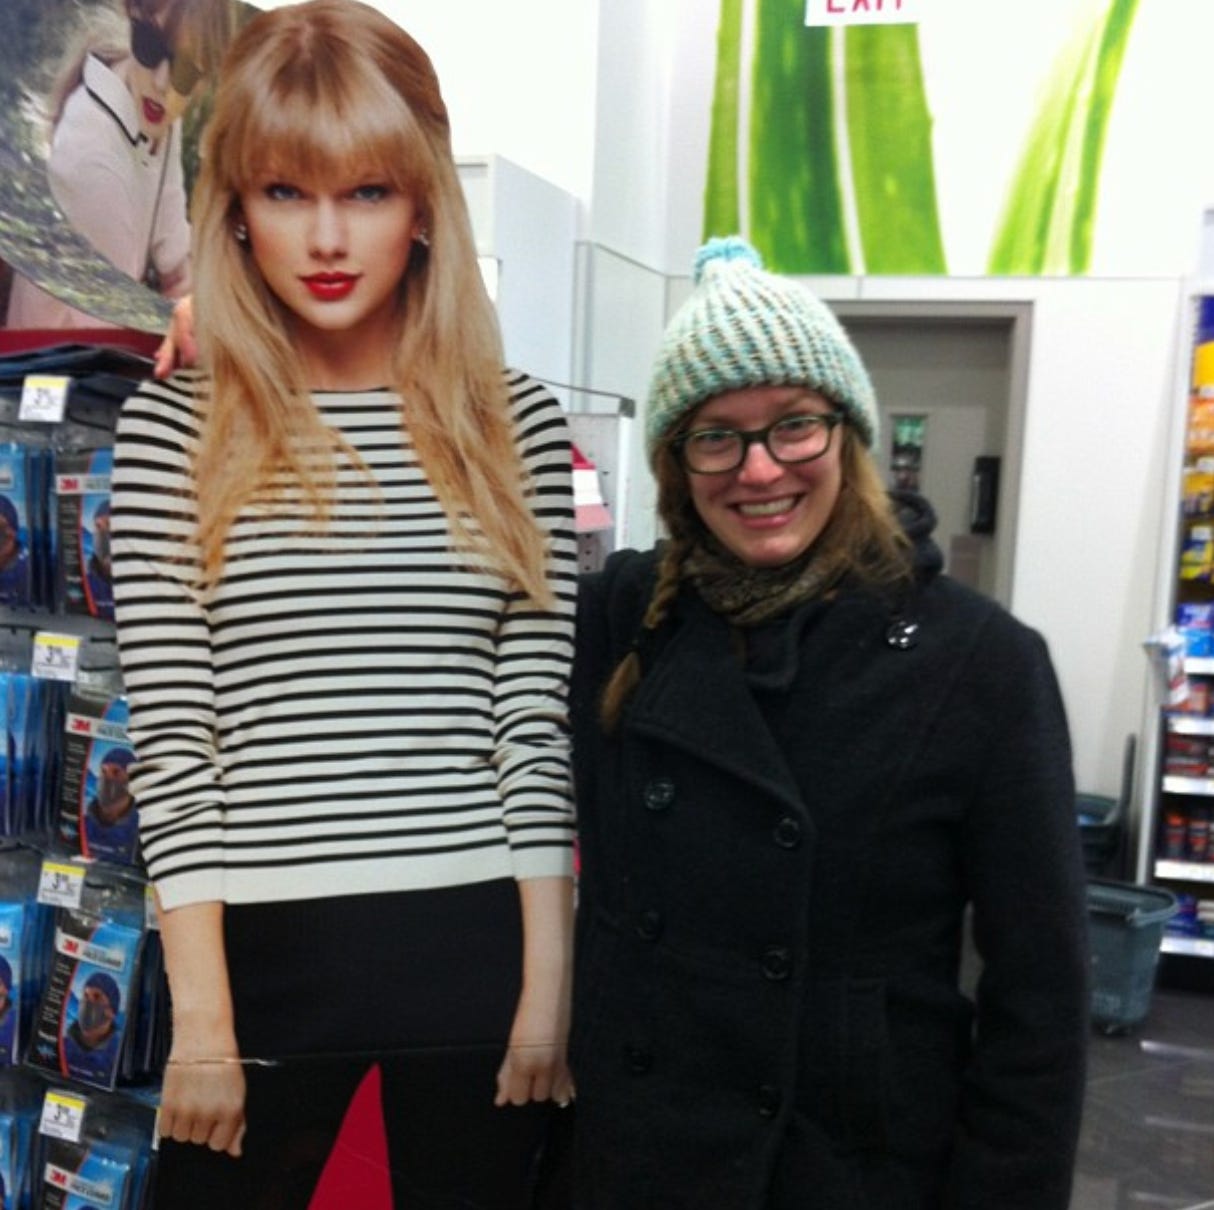 A cardboard cutout of Taylor Swift circa 2012, standing about 6 feet tall with straight hair, lipstick, and bangs. torri stands next to her in a wooly knit hat, chunky jacket, and frizzy hair in braid. 